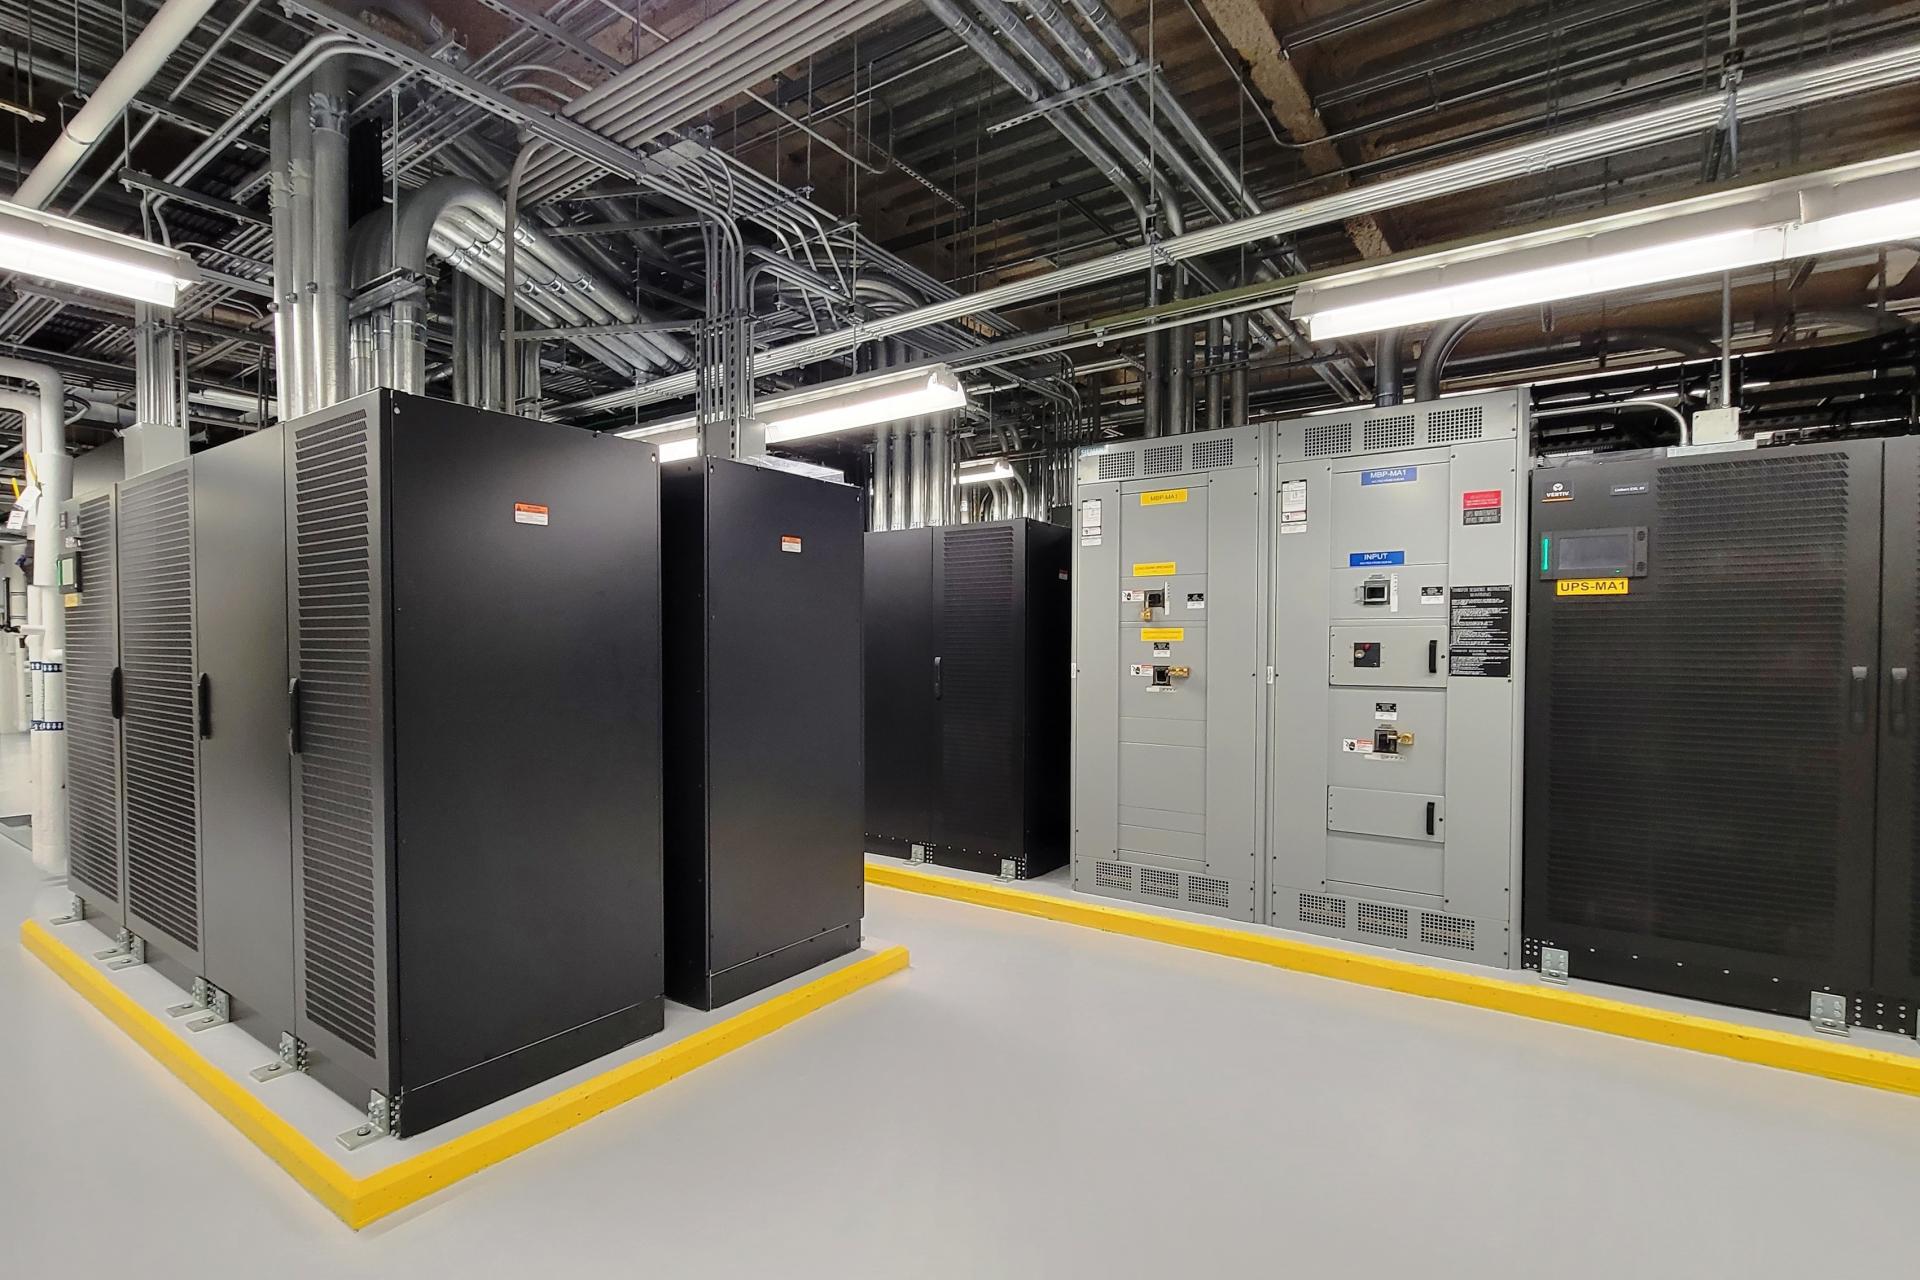 Electrical switchgear and UPS modules